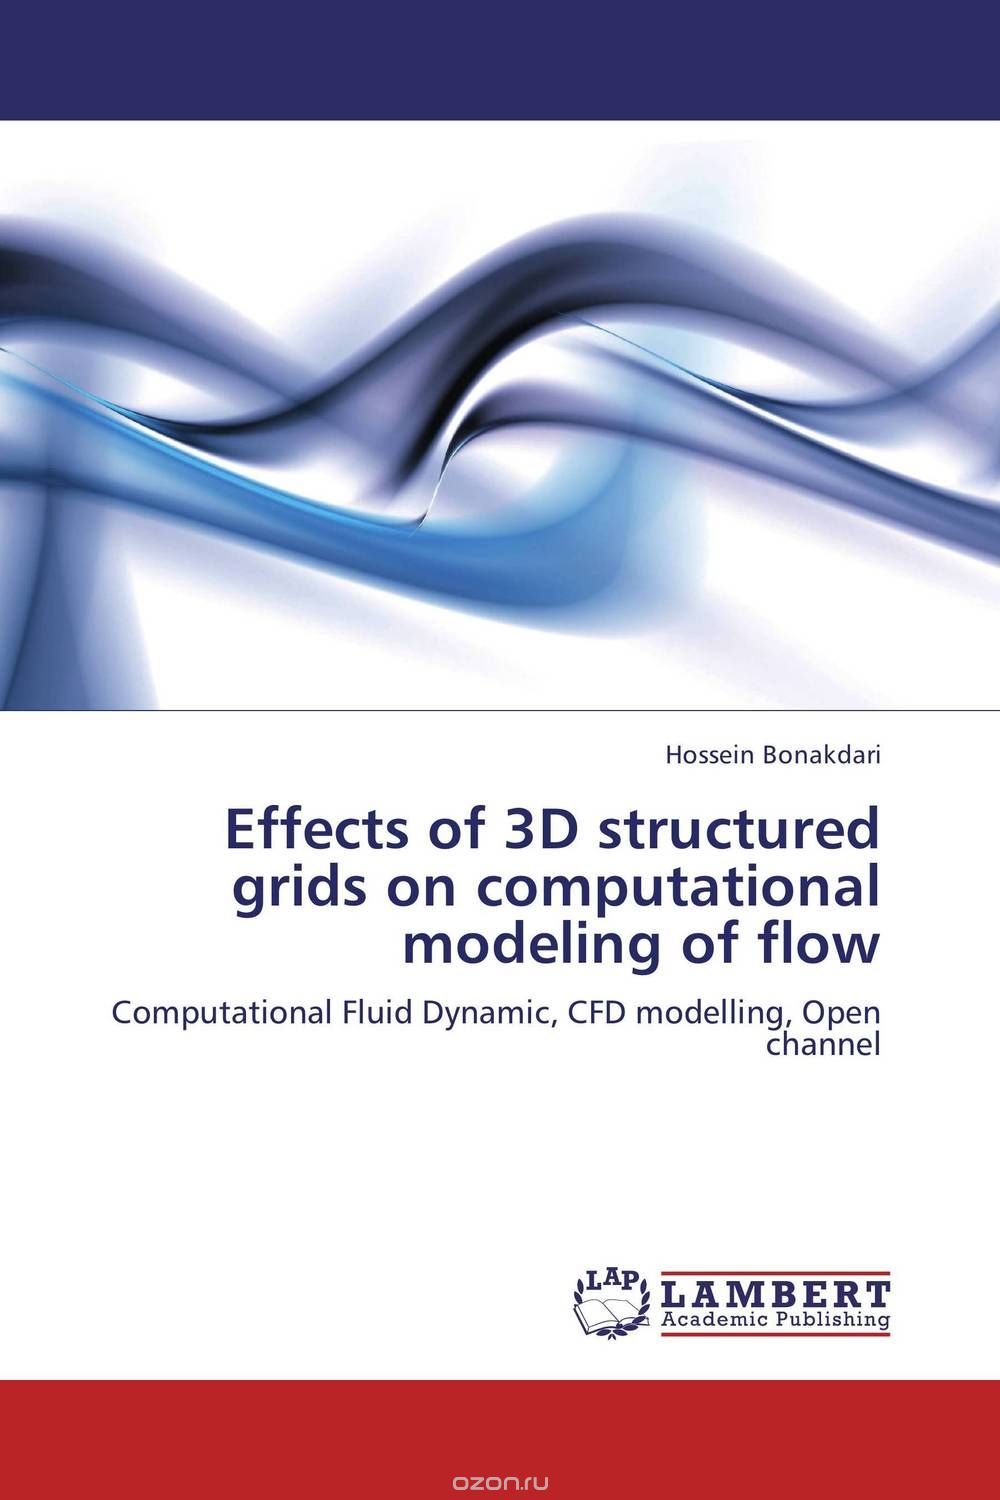 Effects of 3D structured grids on computational modeling of flow